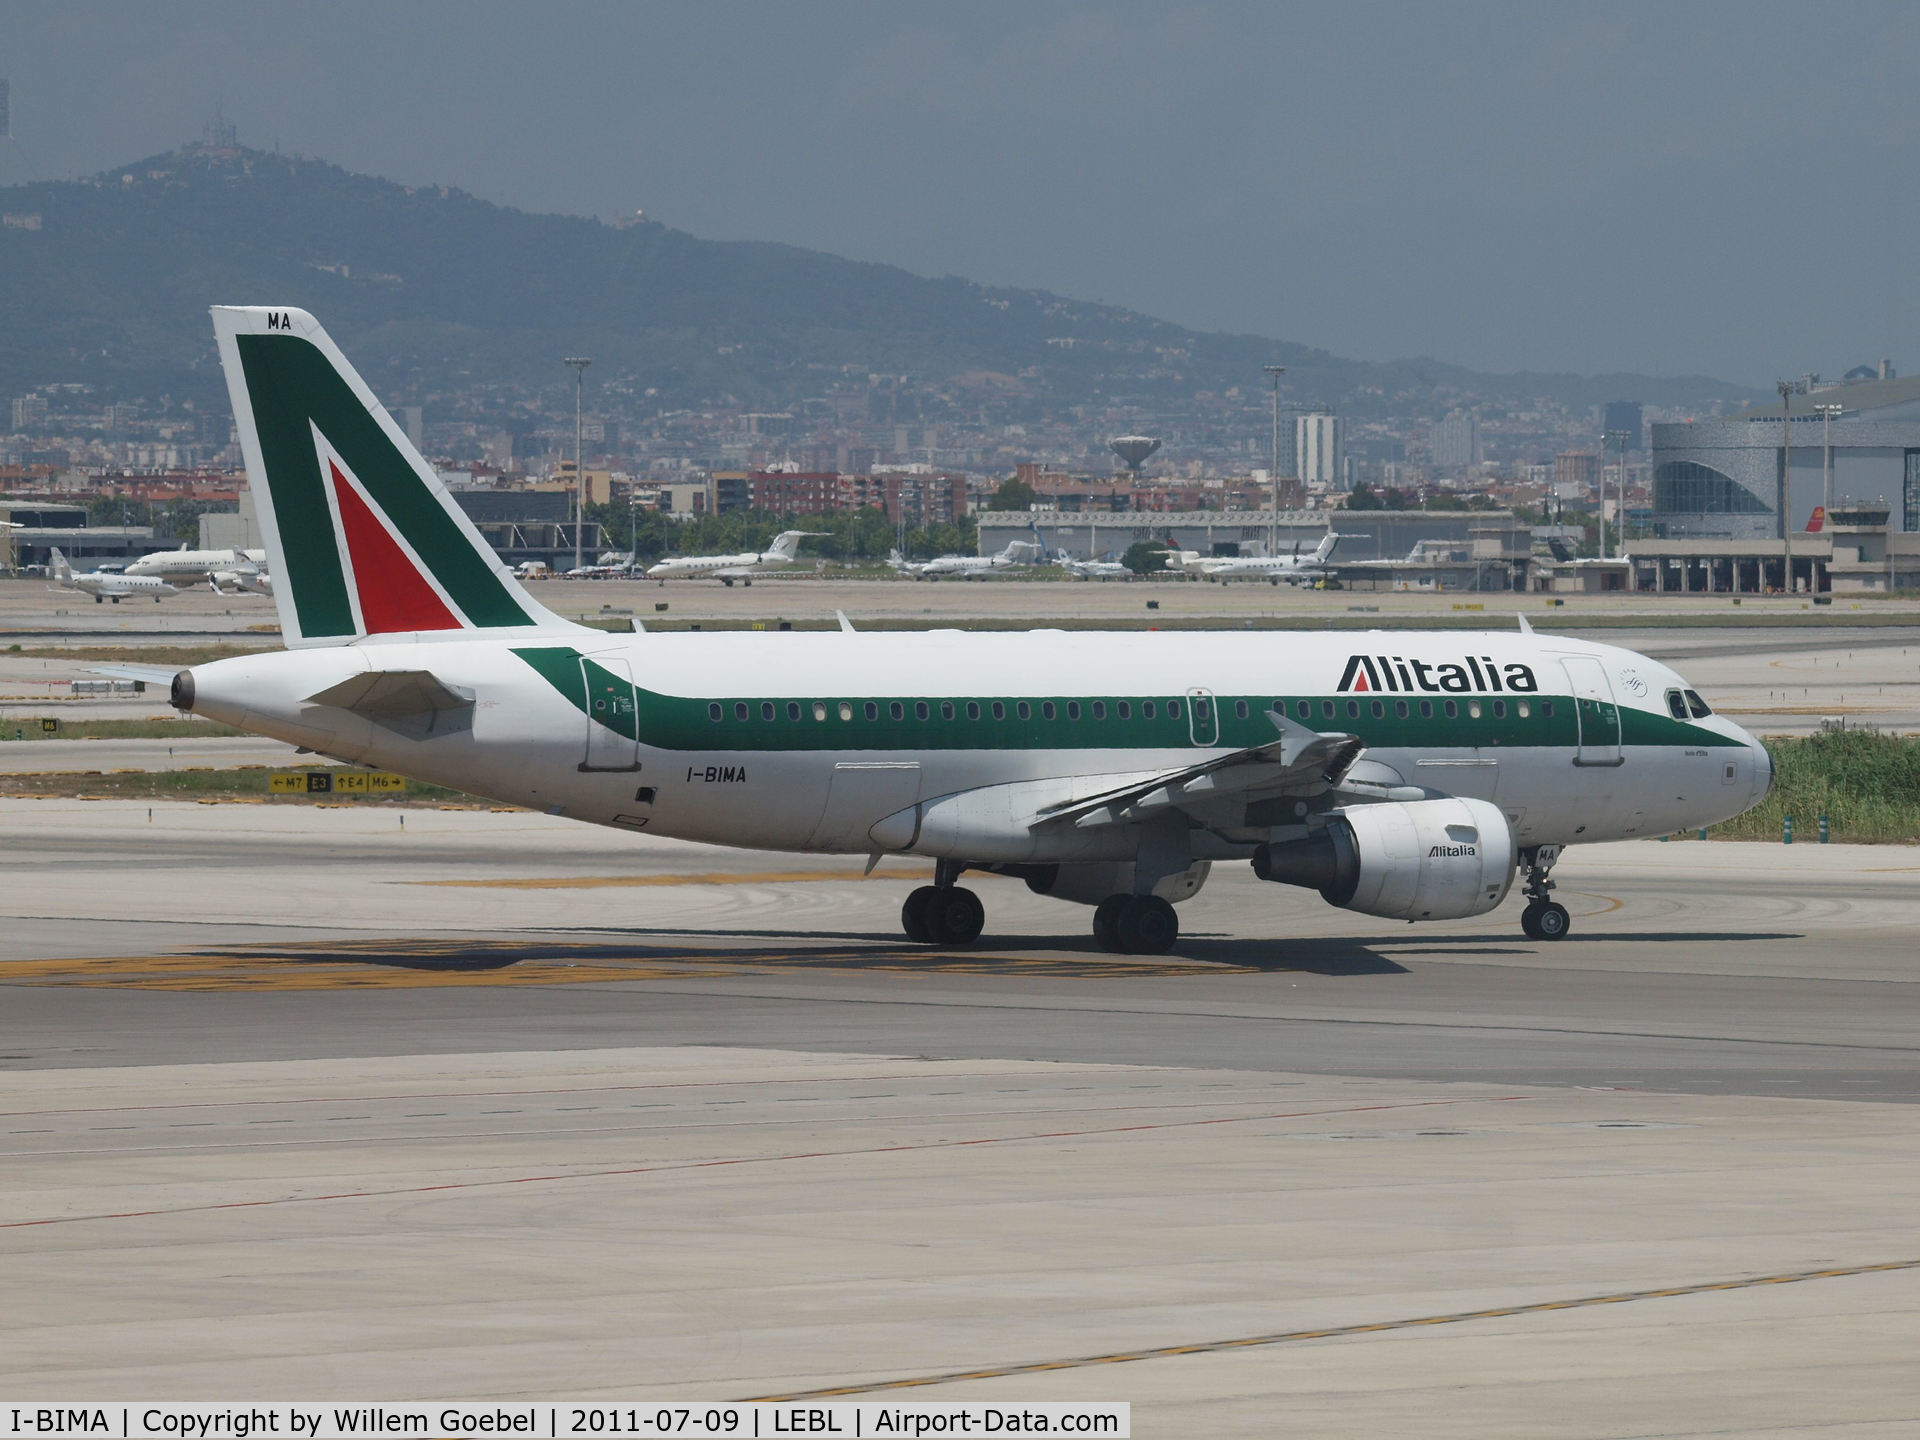 I-BIMA, 2002 Airbus A319-112 C/N 1722, Depart from Barcalona Airport